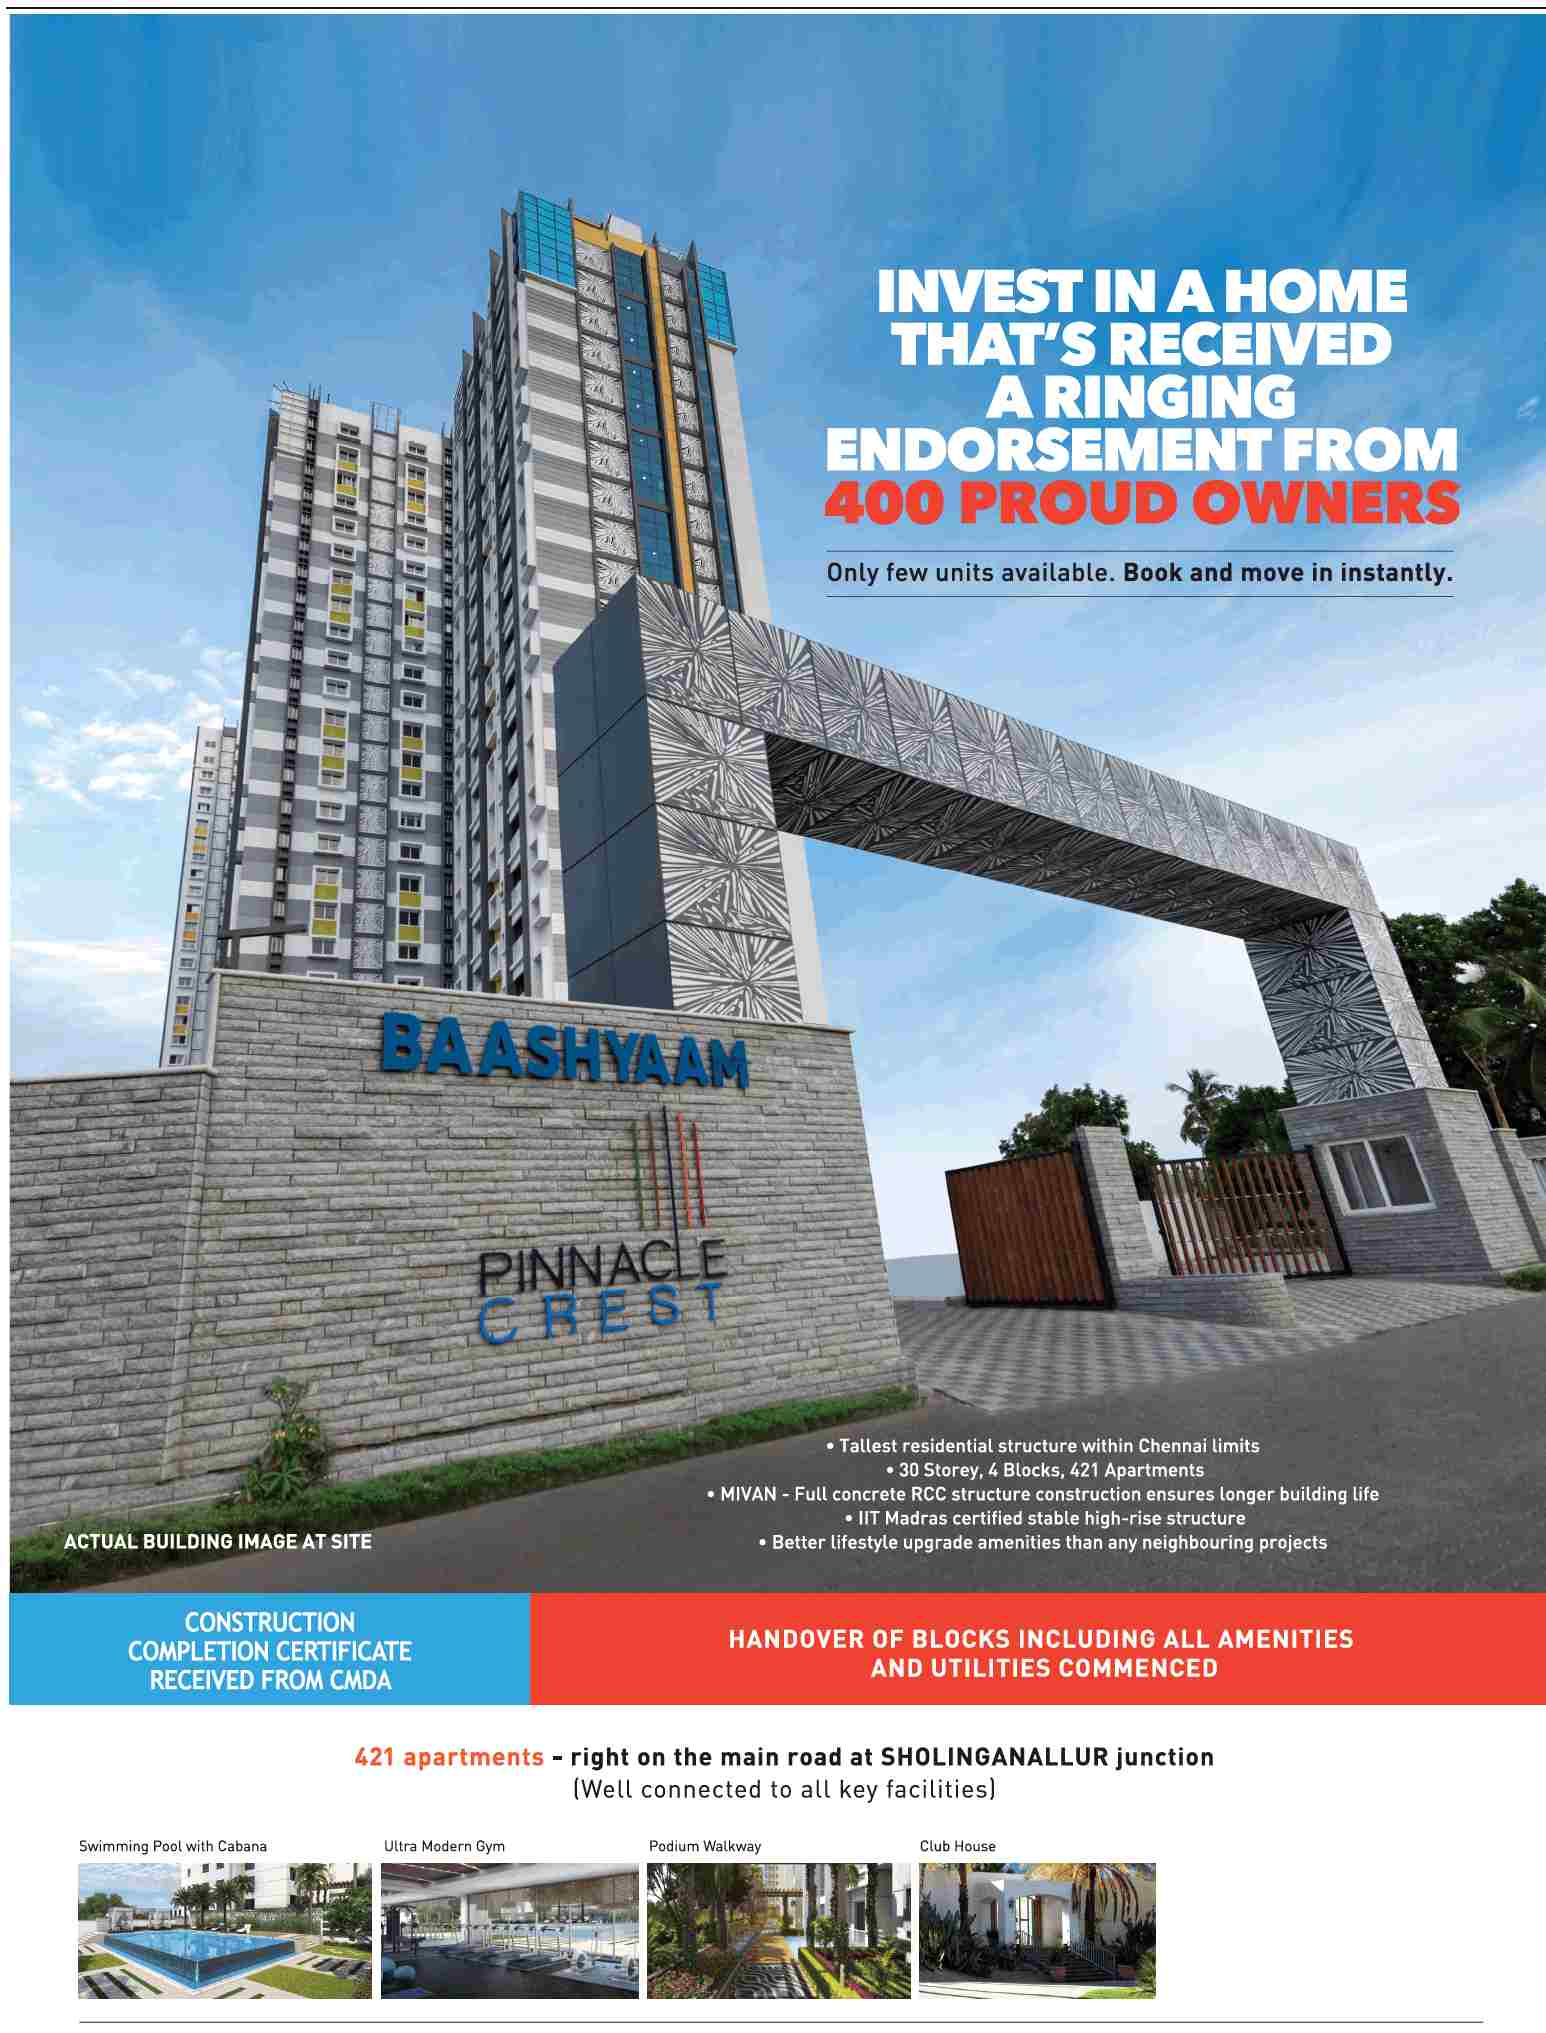 Invest at Baashyaam Pinnacle Crest that received a rising endorsement from 400 proud owners in Chennai